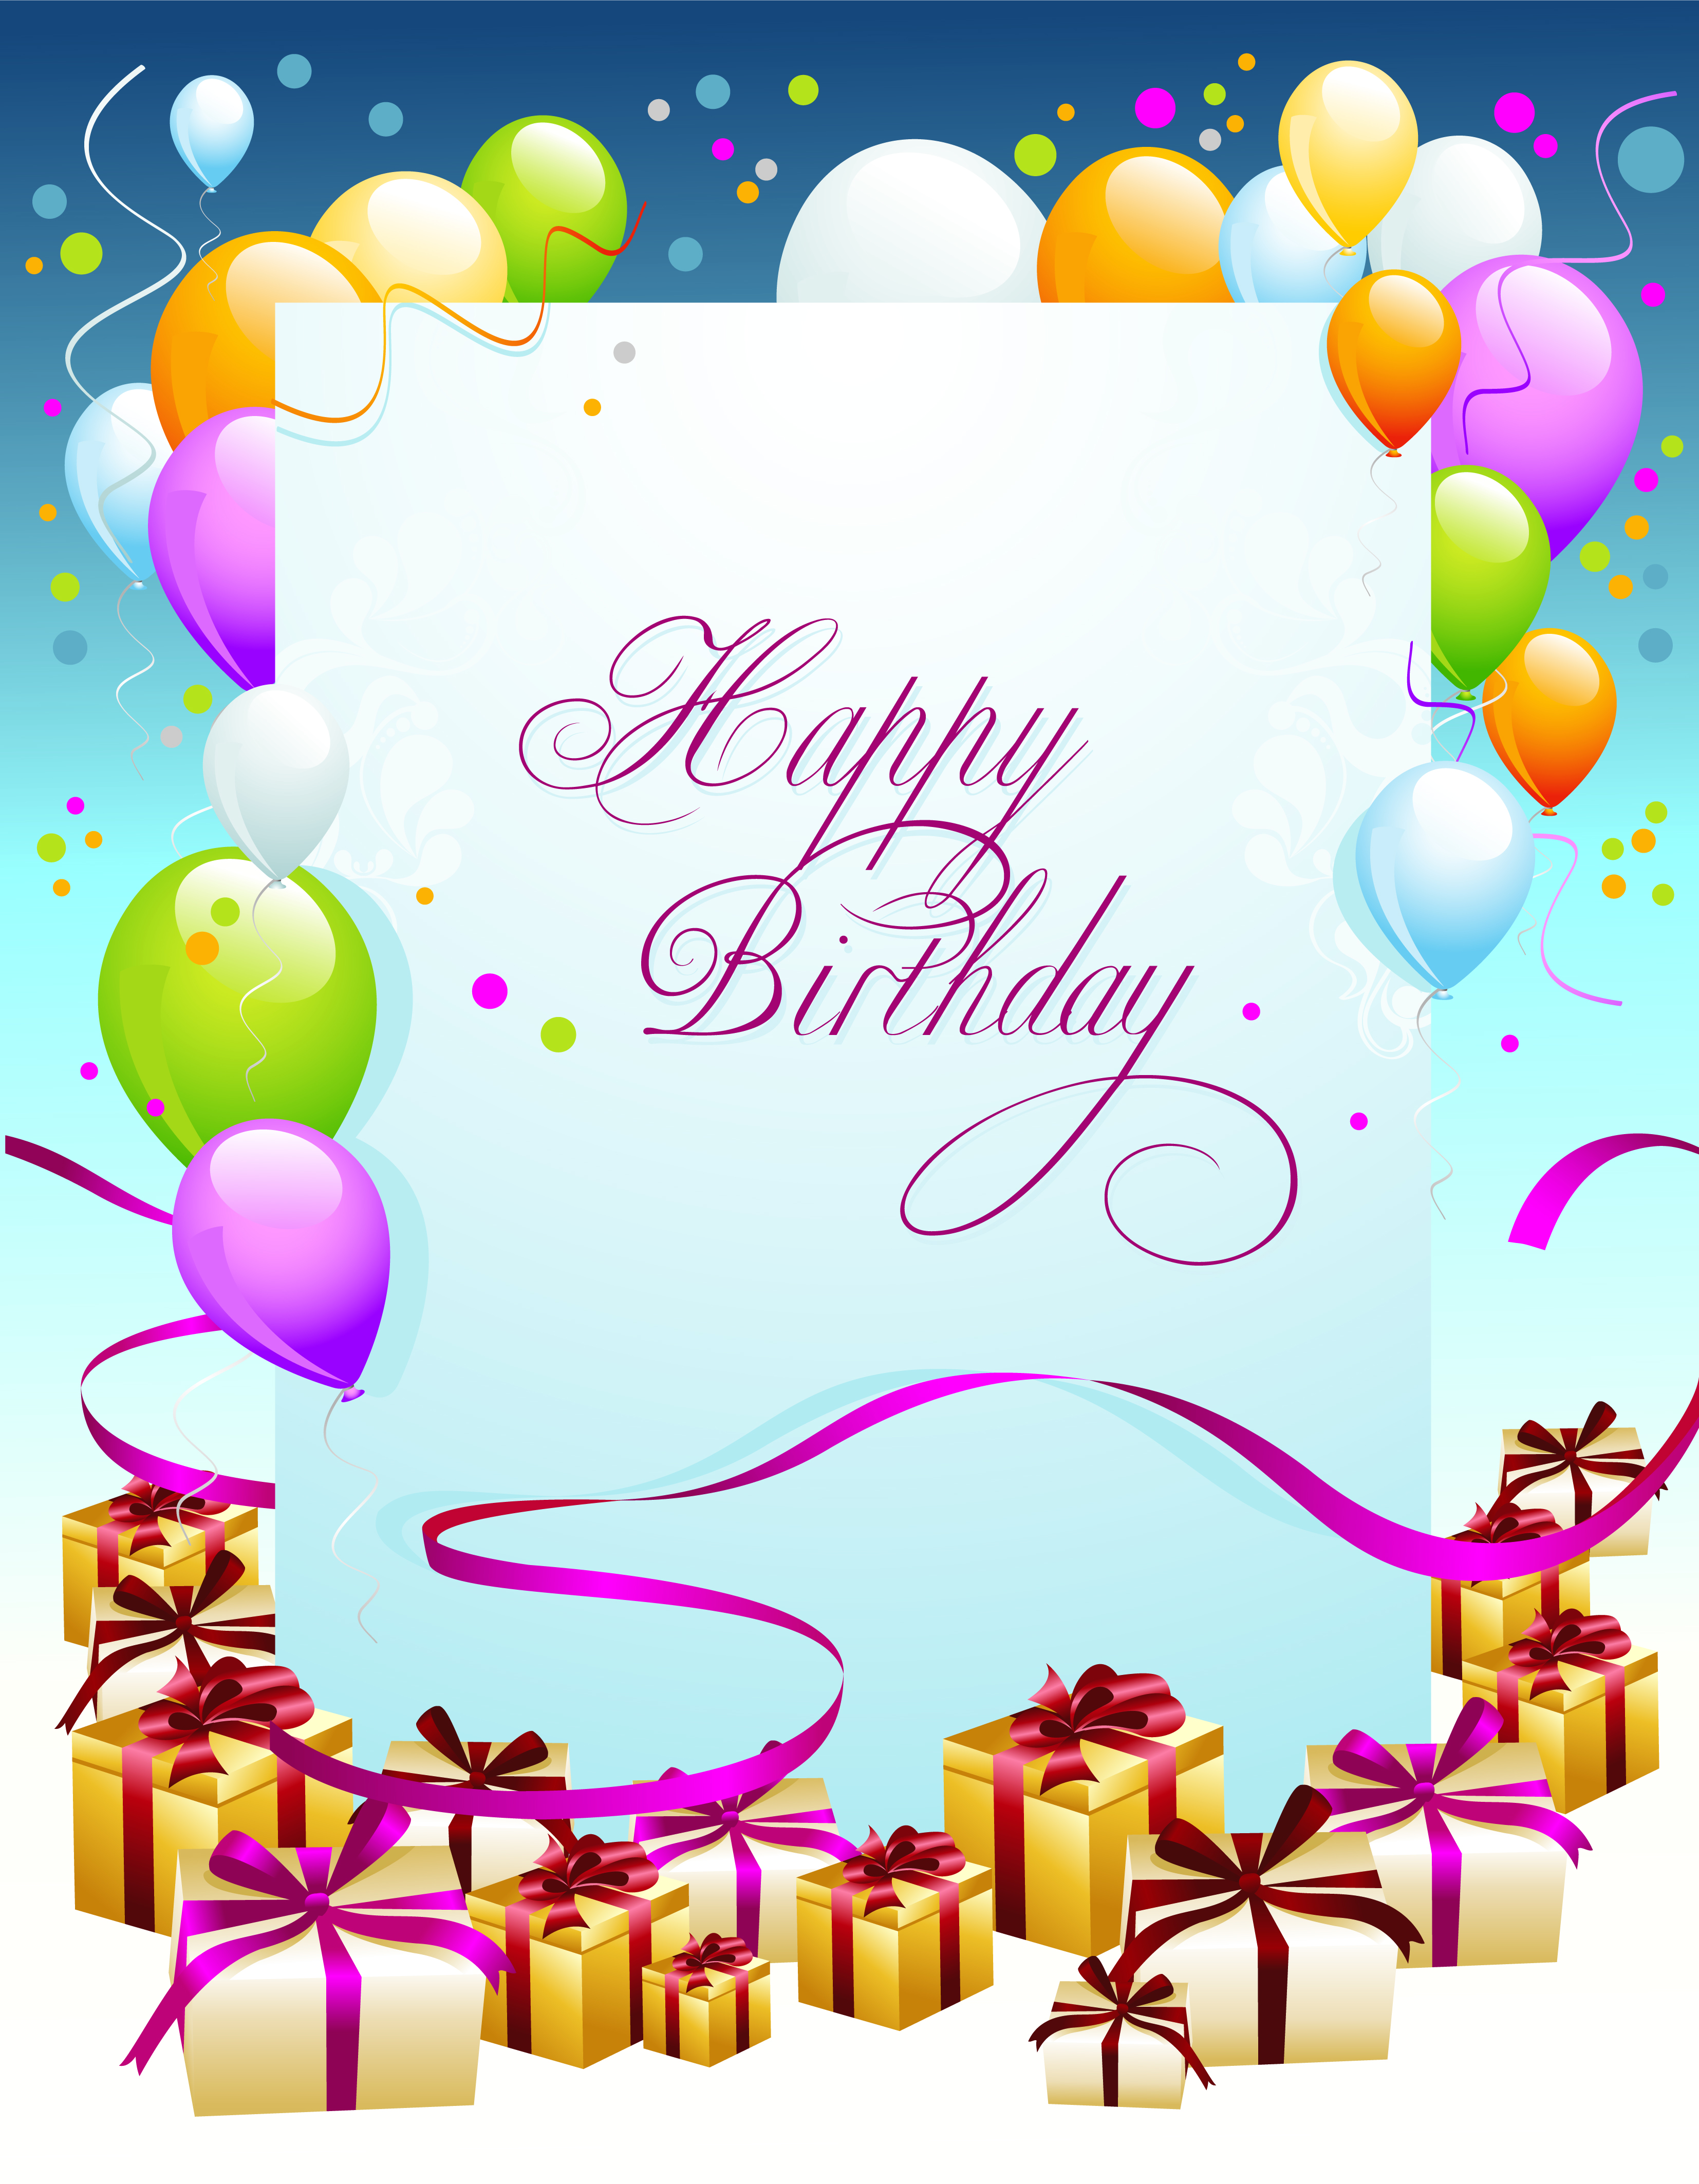 free download of animated birthday clip art - photo #34